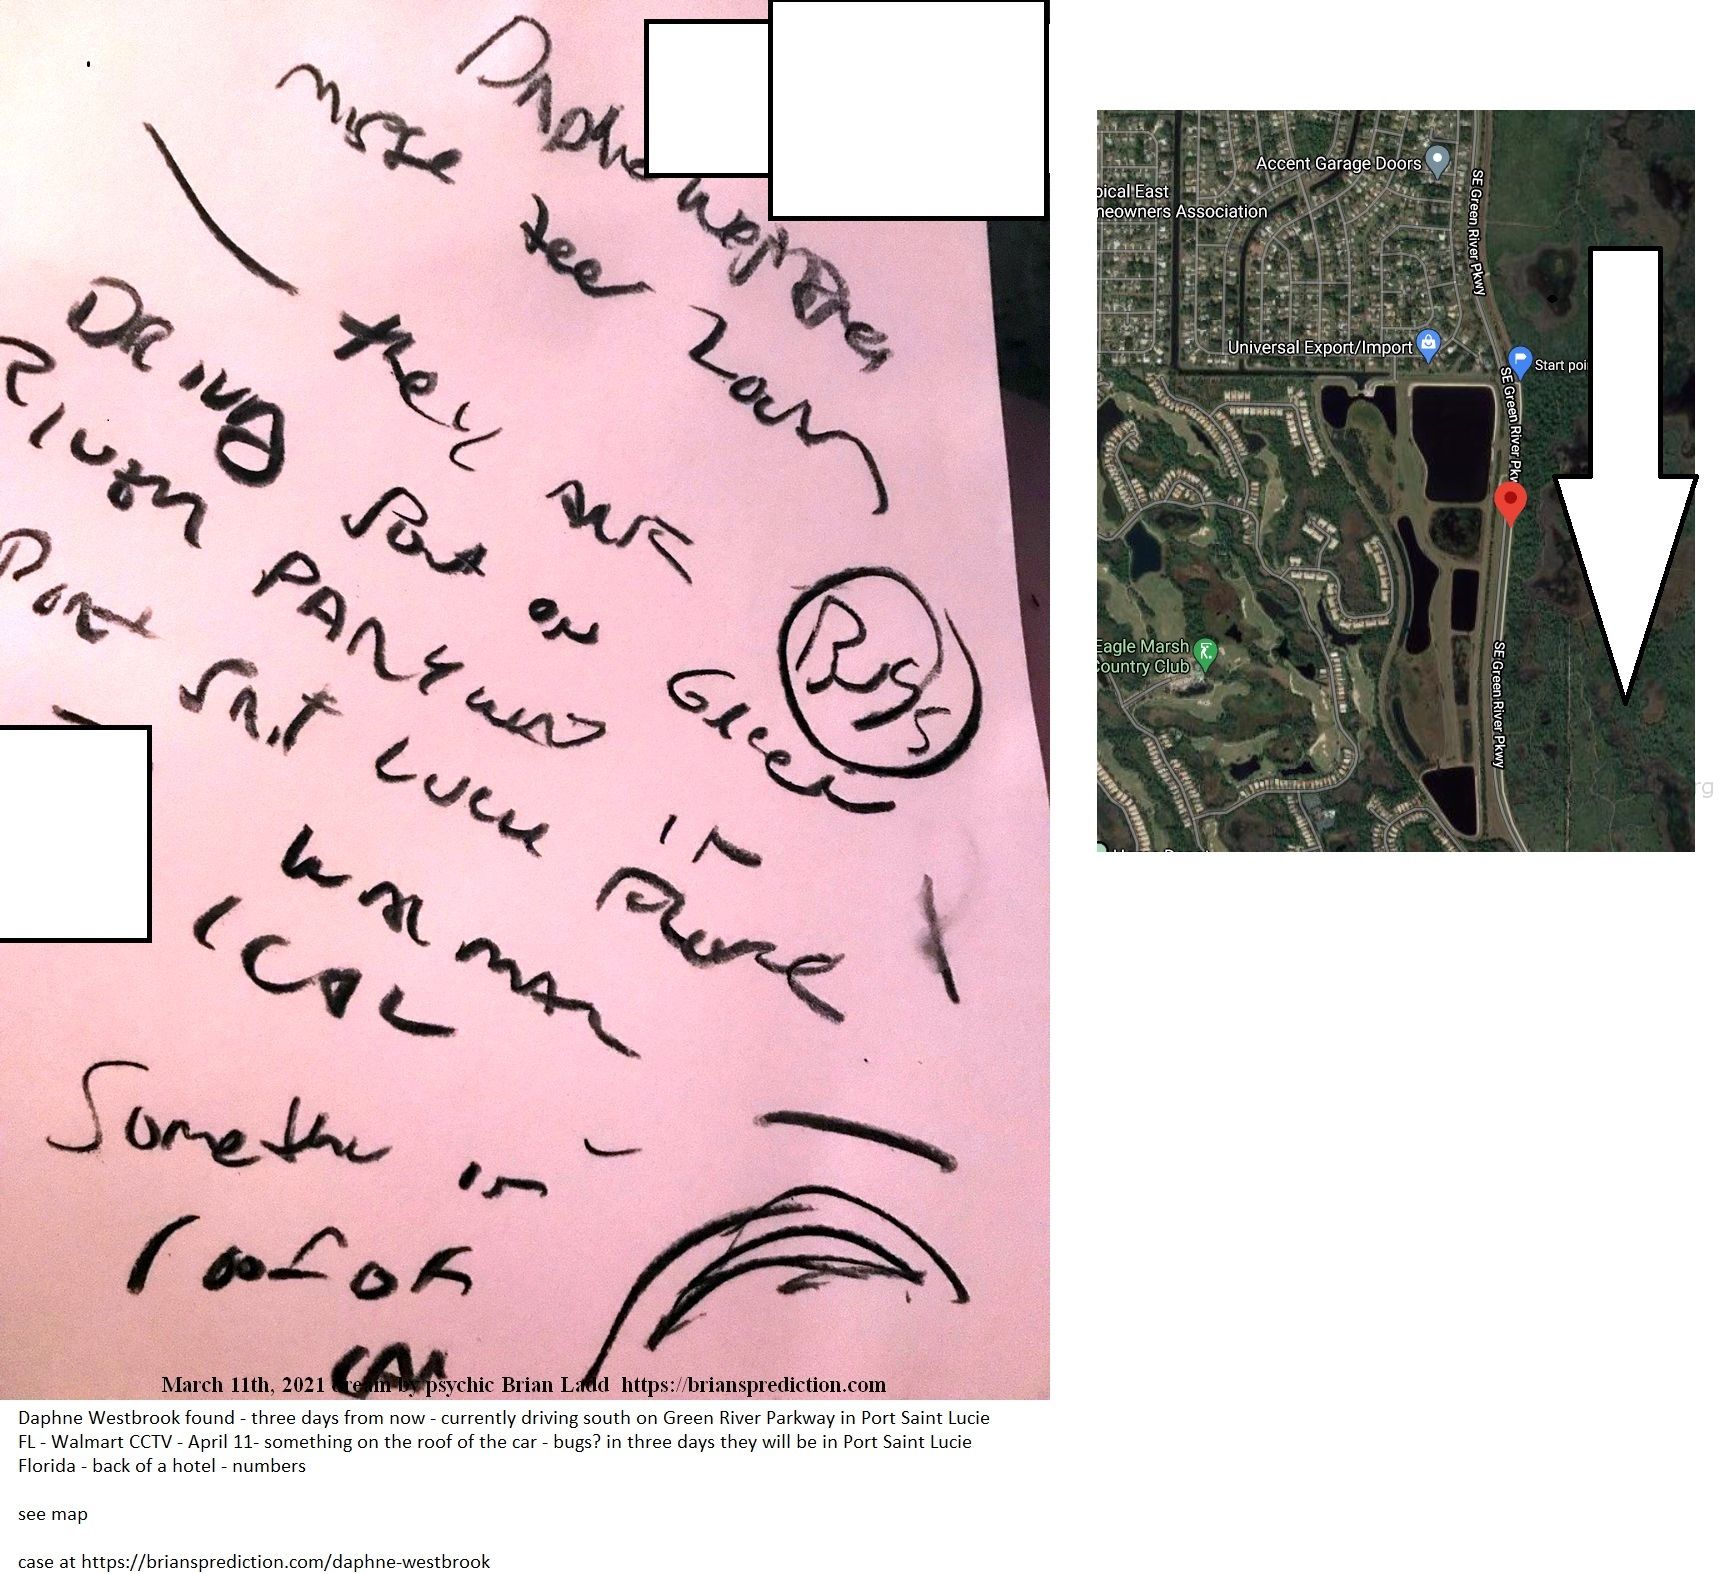 Daphne Westbrook Found Three Days From Now Currently Driving South On Green River Parkway In Port Saint Lucie Fl Walmart...
Daphne Westbrook Found - Three Days From Now - Currently Driving South On Green River Parkway In Port Saint Lucie Fl - Walmart Cctv - April 11- Something On The Roof Of The Car - Bugs? In Three Days They Will Be In Port Saint Lucie Florida - Back Of A Hotel - Numbers  See Map  Case At   https://briansprediction.com/Daphne-Westbrook  Info  Daphne Westbrook Is Missing From Chattanooga, Tn  16-Year-Old Daphne Westbrook Was Last Seen Last Her Father'S Home In The 4700 B/O Saint Elmo In Chattanooga, Tennessee On October 6th, 2019.  She Told Her Mother She Was Going To Walk Her Dog, Fern, Who Is Also Missing.  On October 10th, She Called Her Mother From The Dalton, Georgia Area To Tell Her She Was Not Missing.  That Night Her Car Was Found Abandoned @ The Glen Falls Trailhead On Lookout Mountain Near Her Father'S Home; The Park Ranger Said It Had Been There For At Least 24 Hours.  Daphne Is 5'3, 110 Pounds, And White W/ Light Brown Hair & Brown Eyes; She May Travel To The Greater Chattanooga Metropolitan Area, Georgia, Colorado, Or New Mexico.  Fern Is White W/ A Brown Face. Contact The Chattanooga Police Department @ 423-698-2525 Or Tennessee Missing & Unsolved @ 615-556-0534 With Any Information About Her Current Whereabouts.
